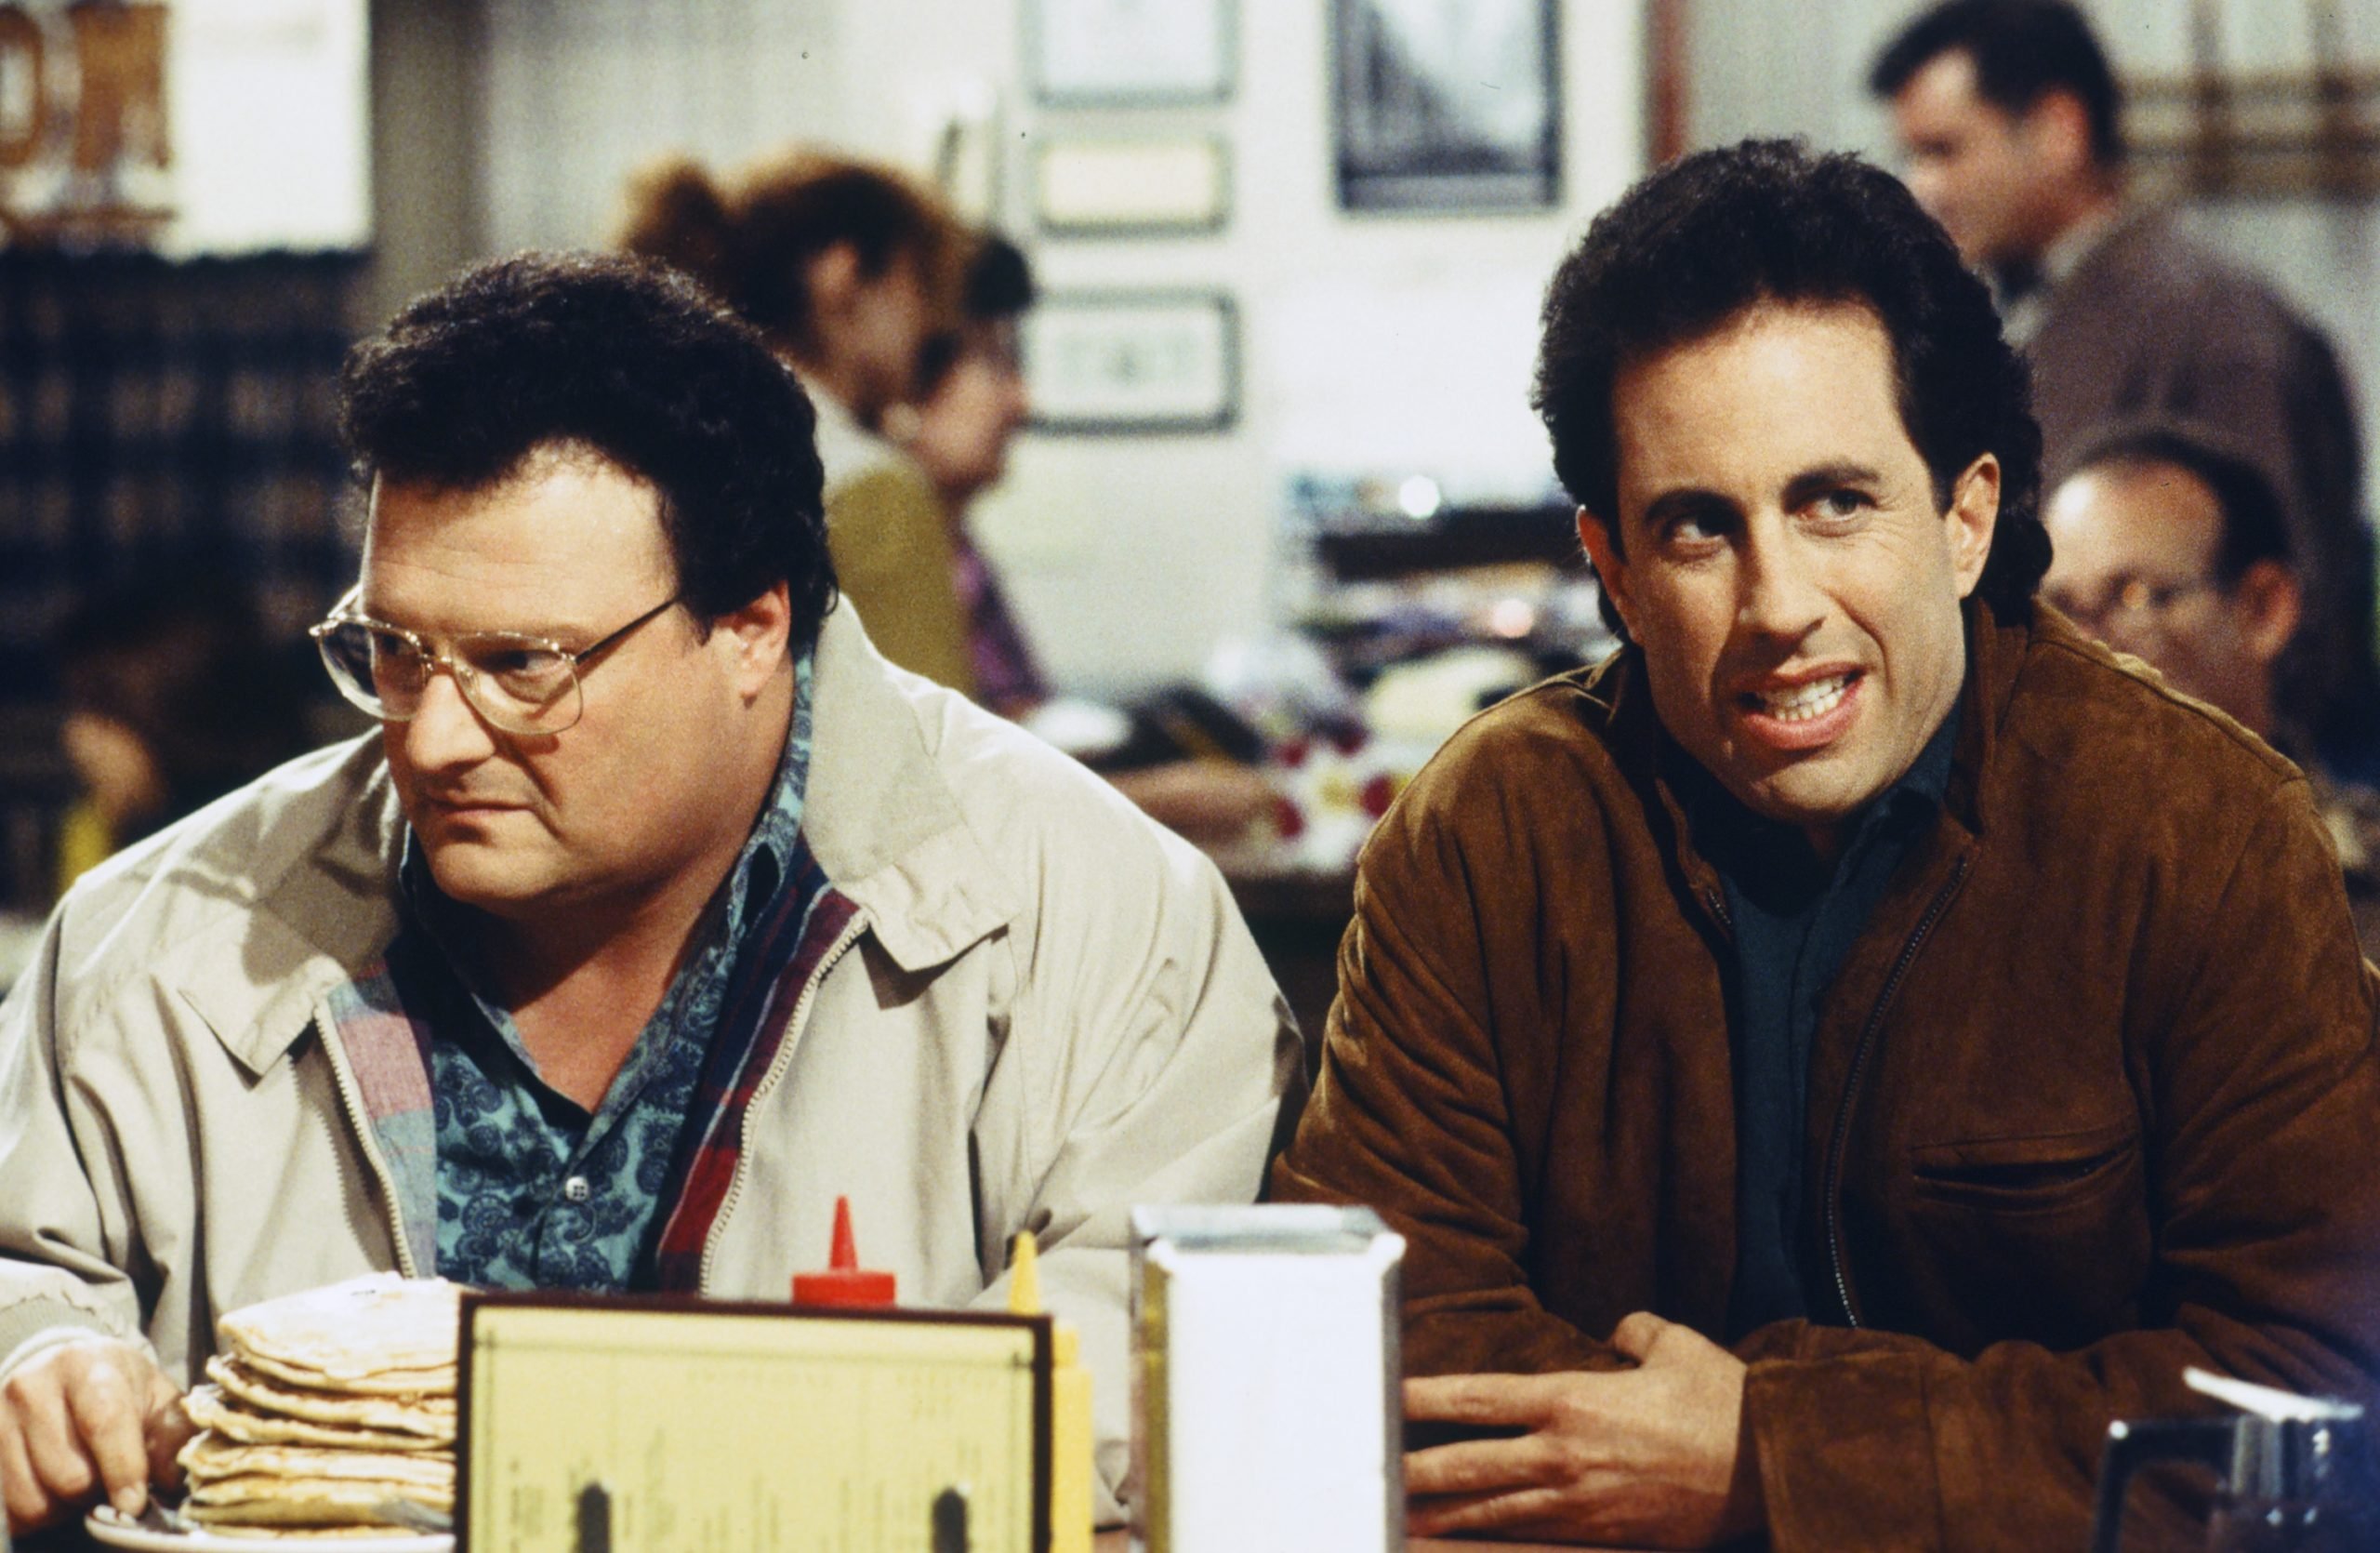 Seinfeld and Newman